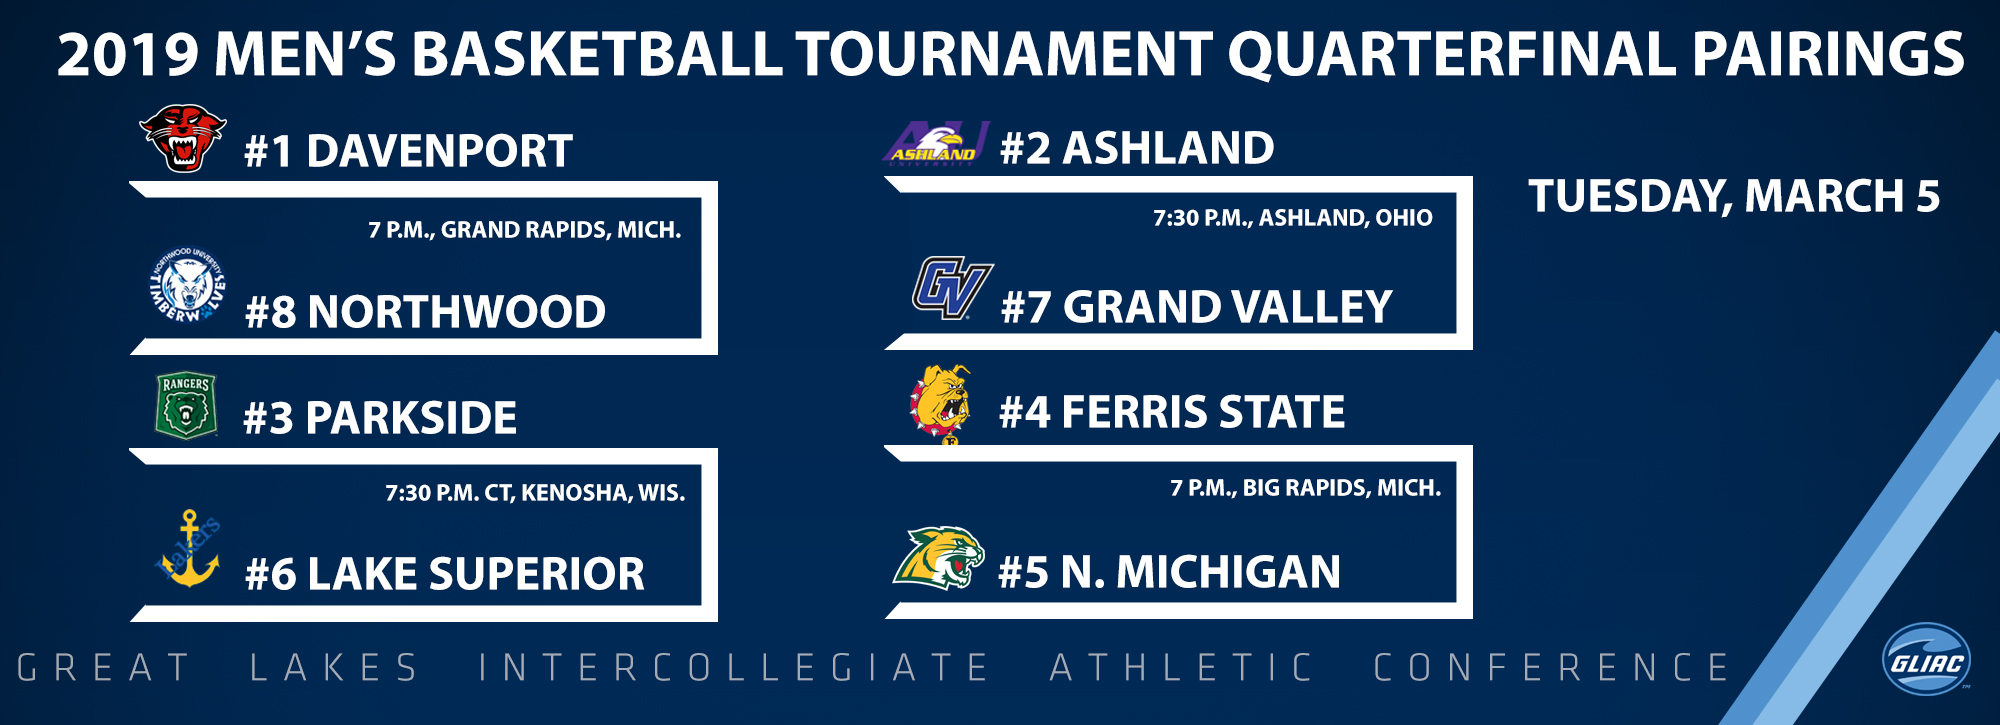 Men's basketball first round includes games at Davenport, Ashland, Parkside and Ferris State